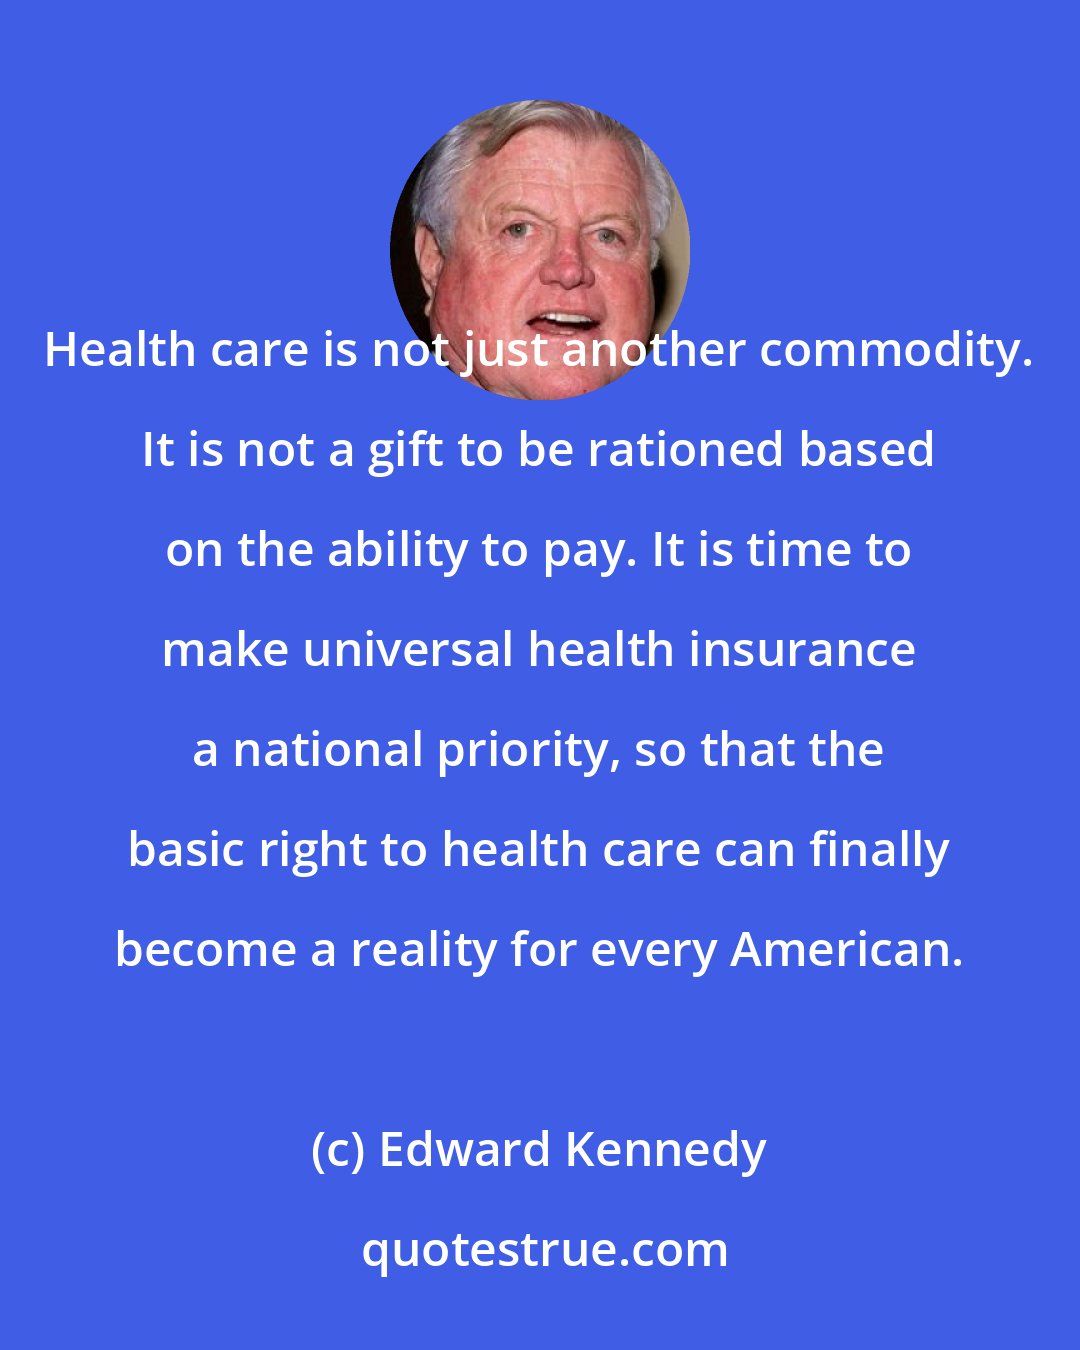 Edward Kennedy: Health care is not just another commodity. It is not a gift to be rationed based on the ability to pay. It is time to make universal health insurance a national priority, so that the basic right to health care can finally become a reality for every American.